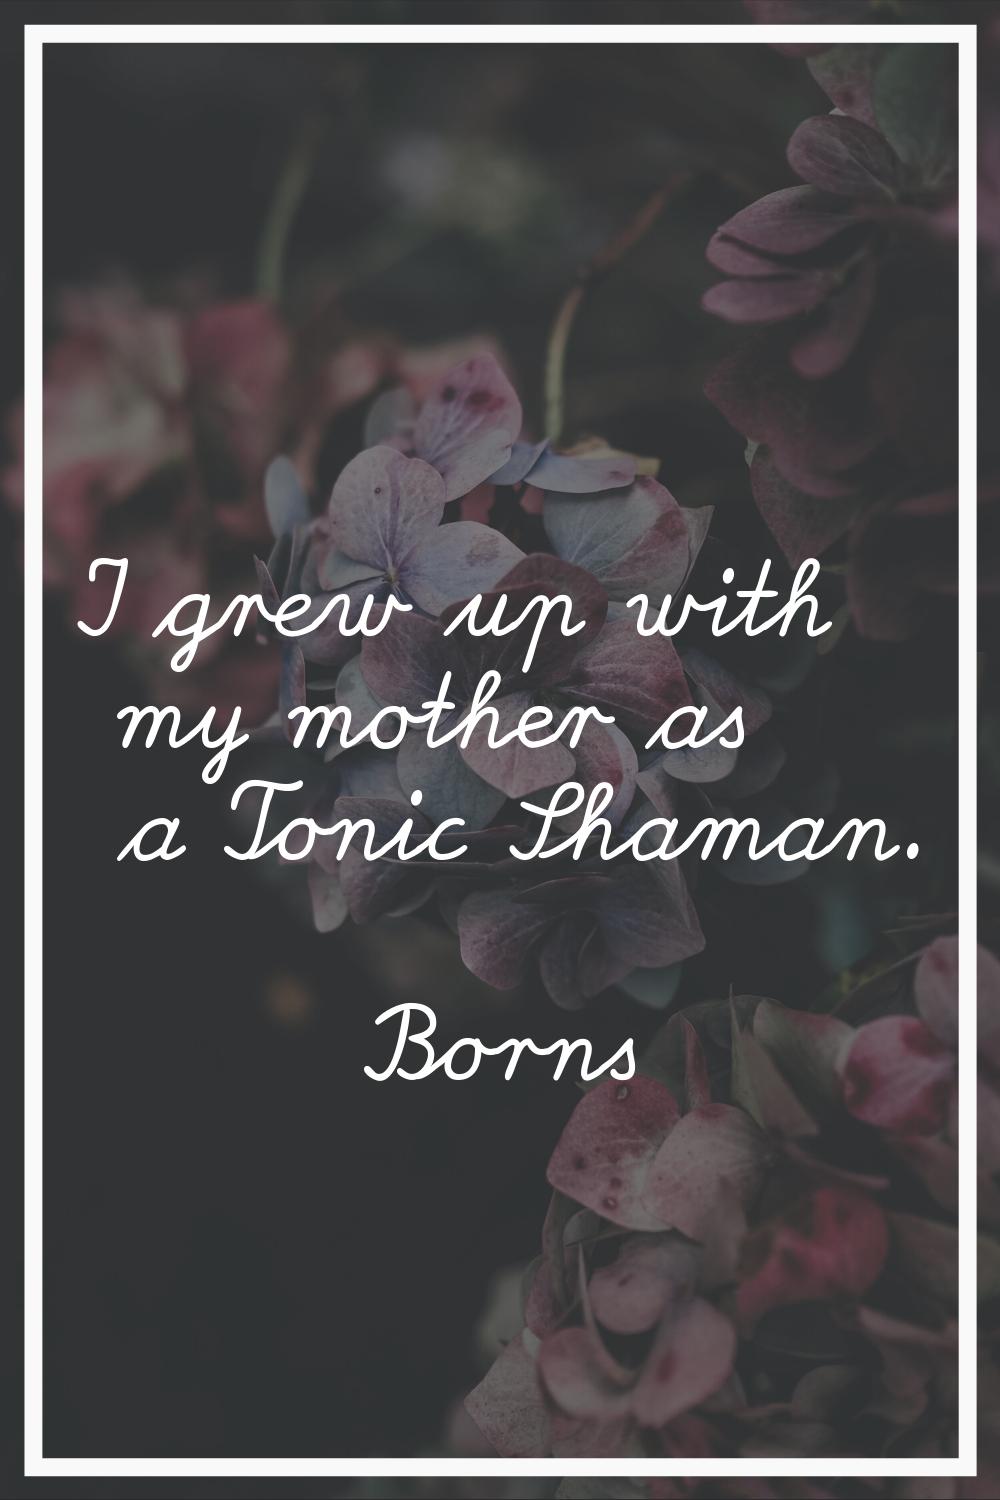 I grew up with my mother as a Tonic Shaman.